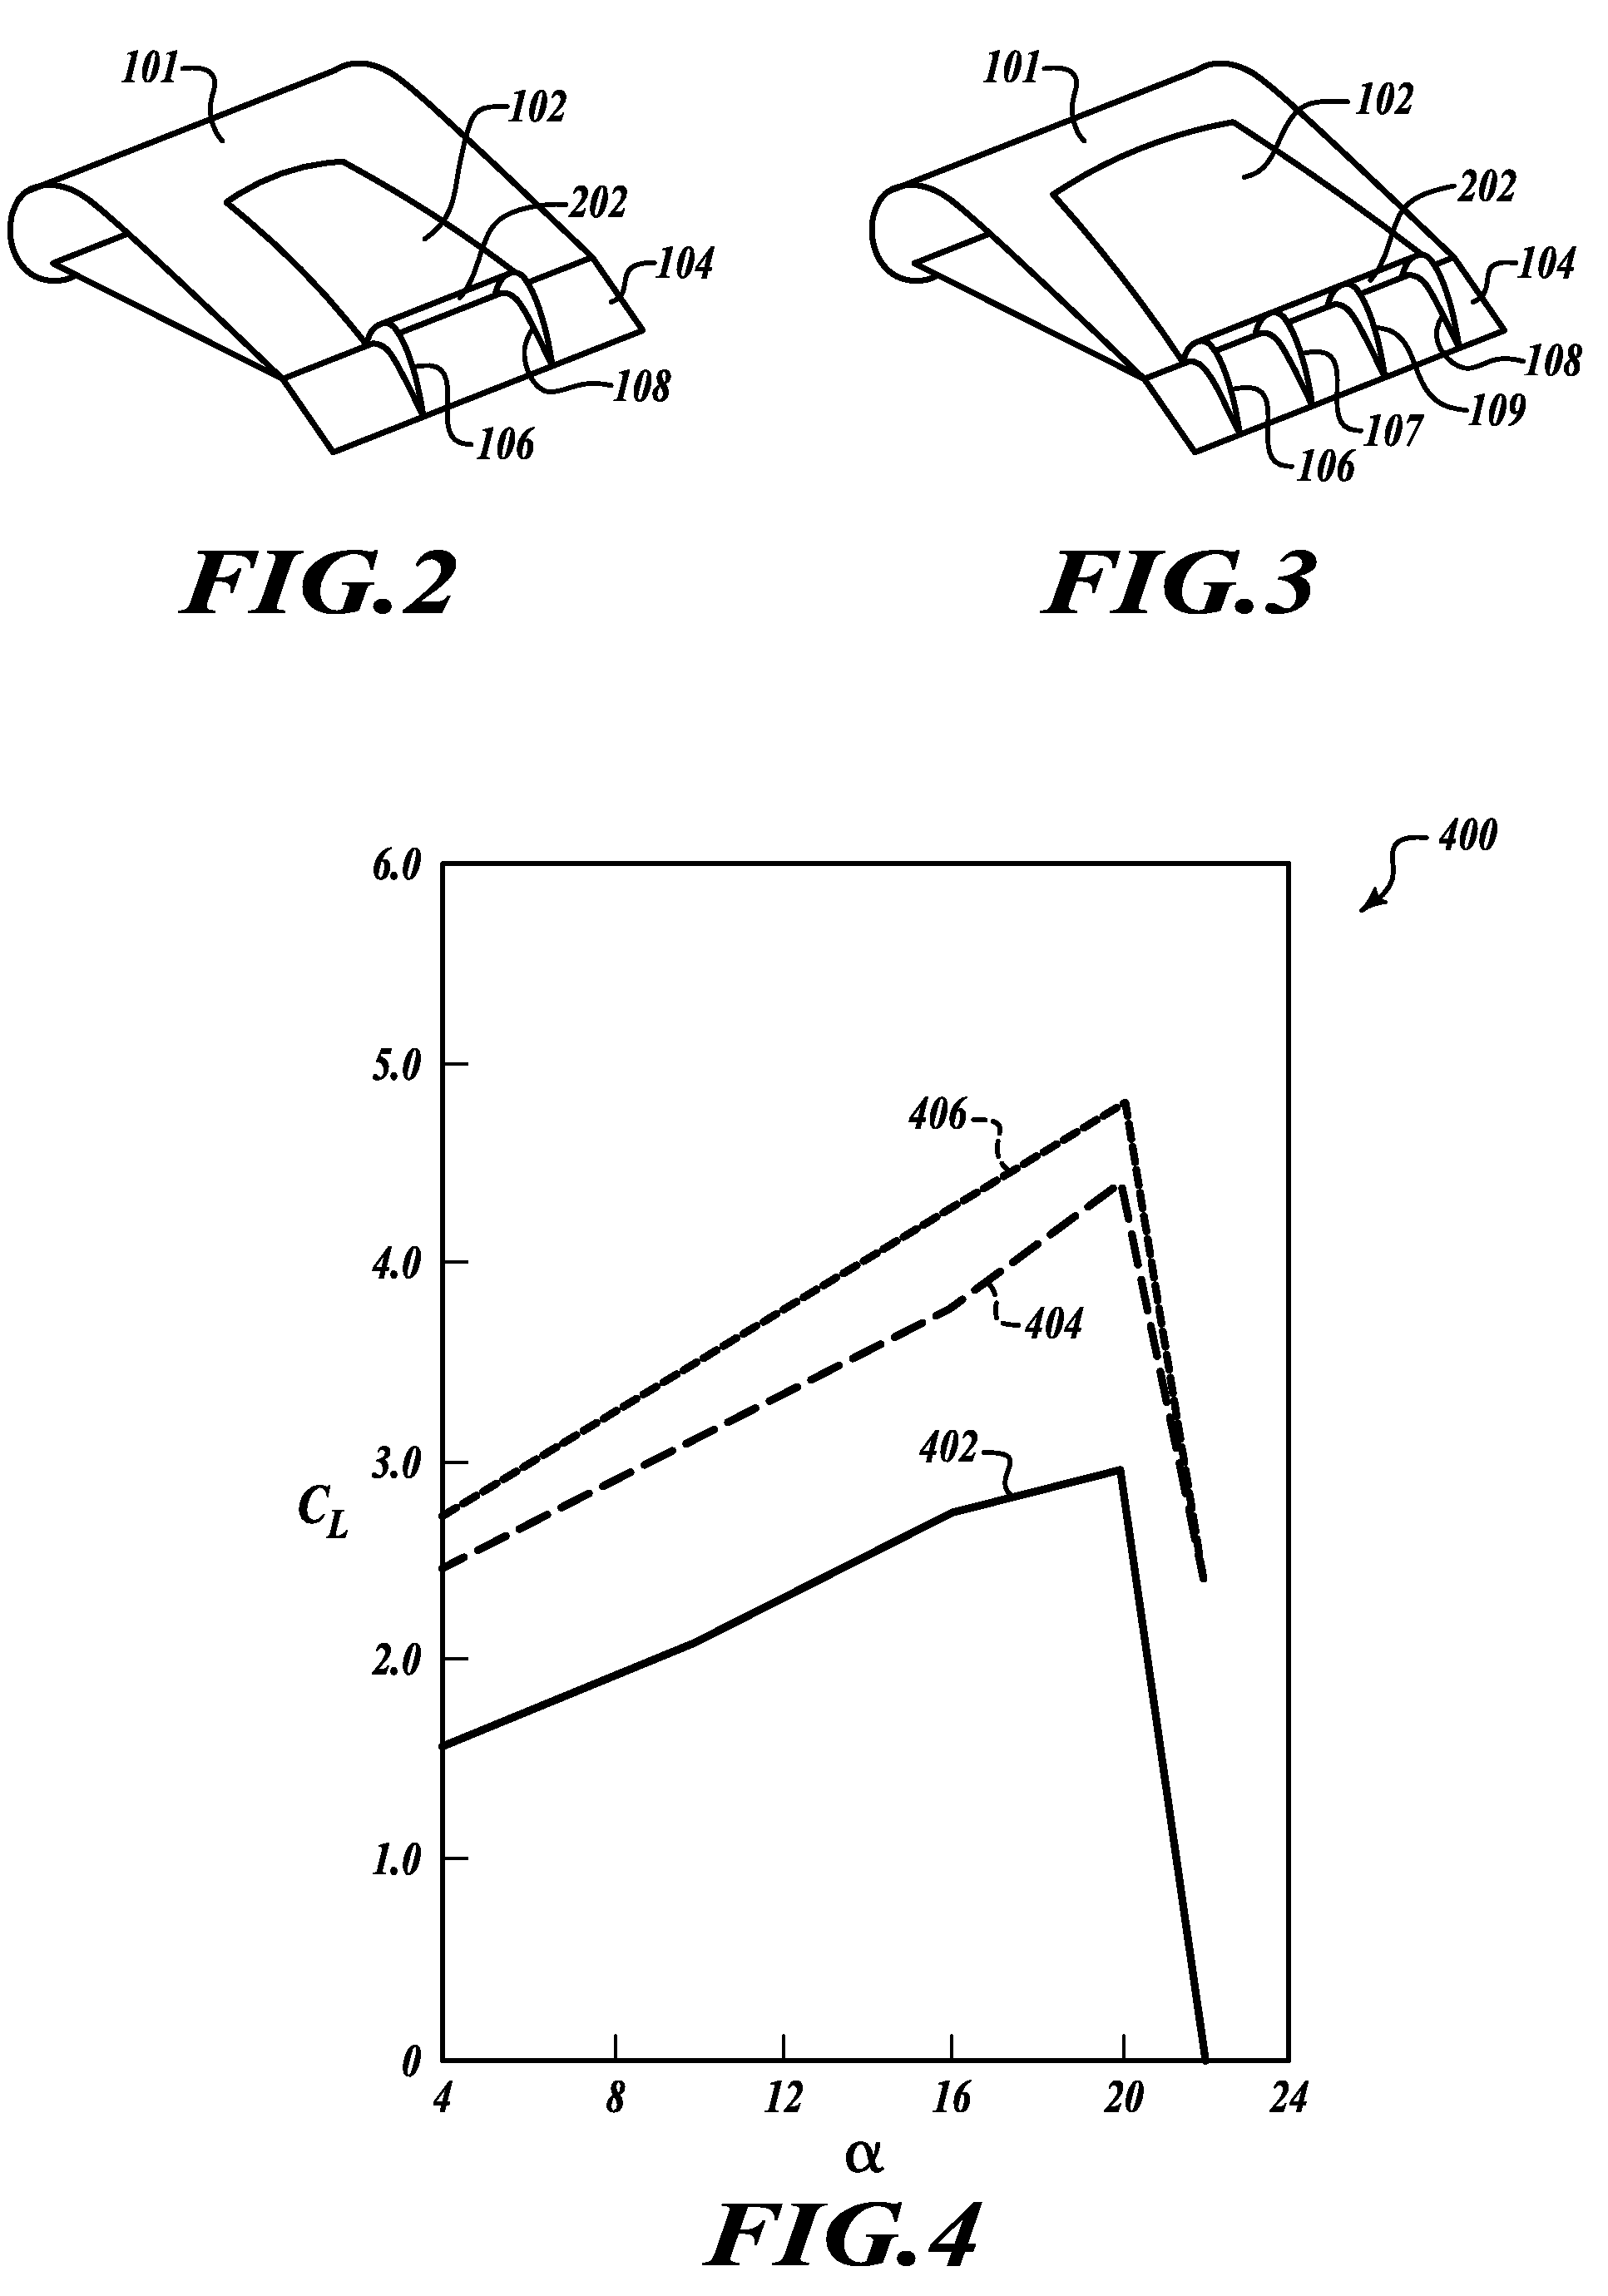 Method and apparatus for enhancing engine-powered lift in an aircraft